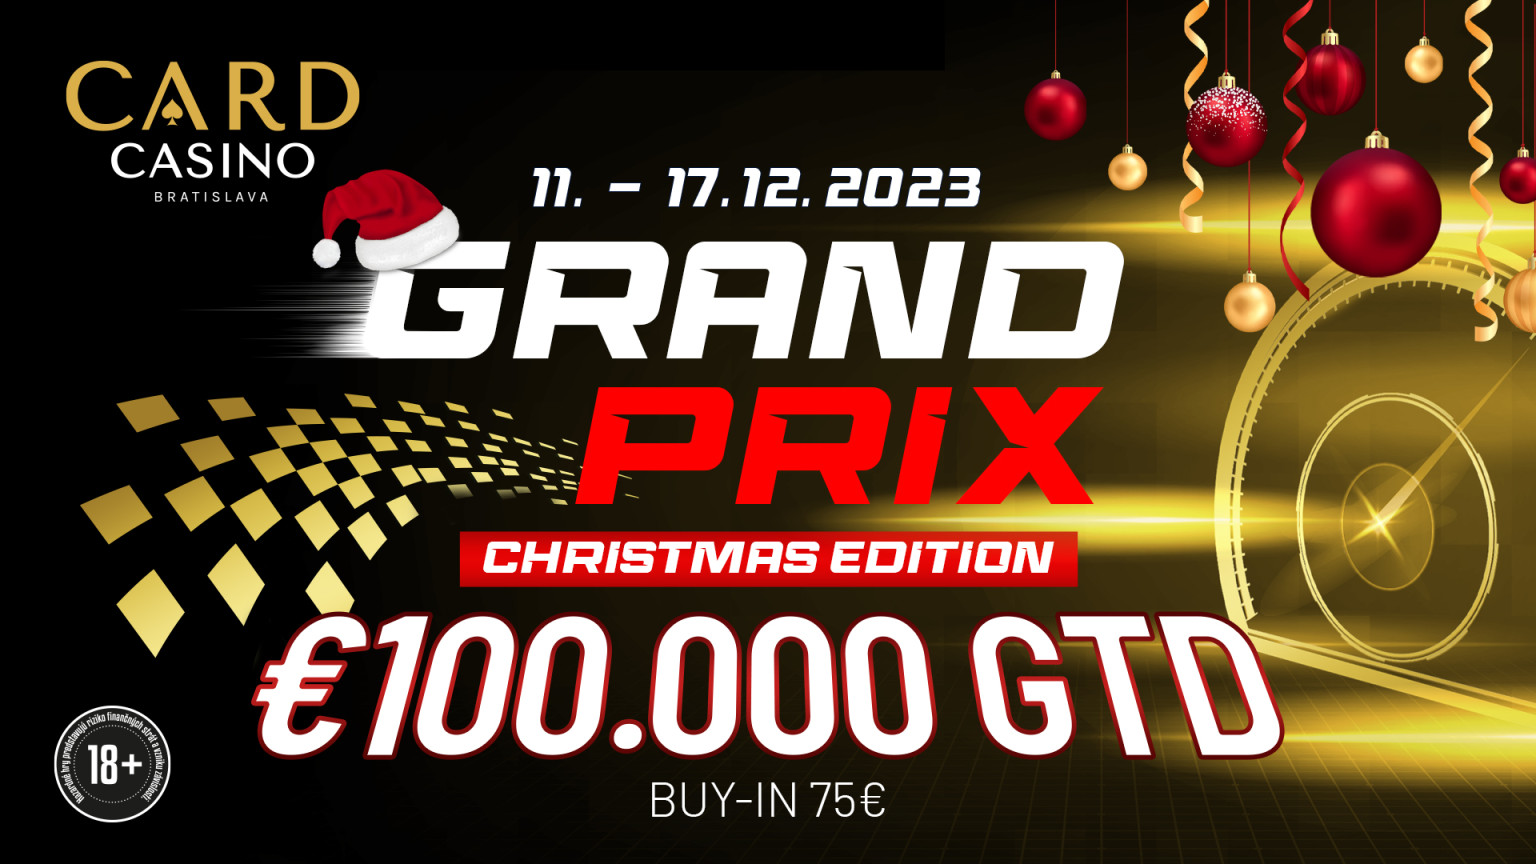 Reduced buy-in, same guarantee. Grand Prix Christmas Edition €100,000 gift